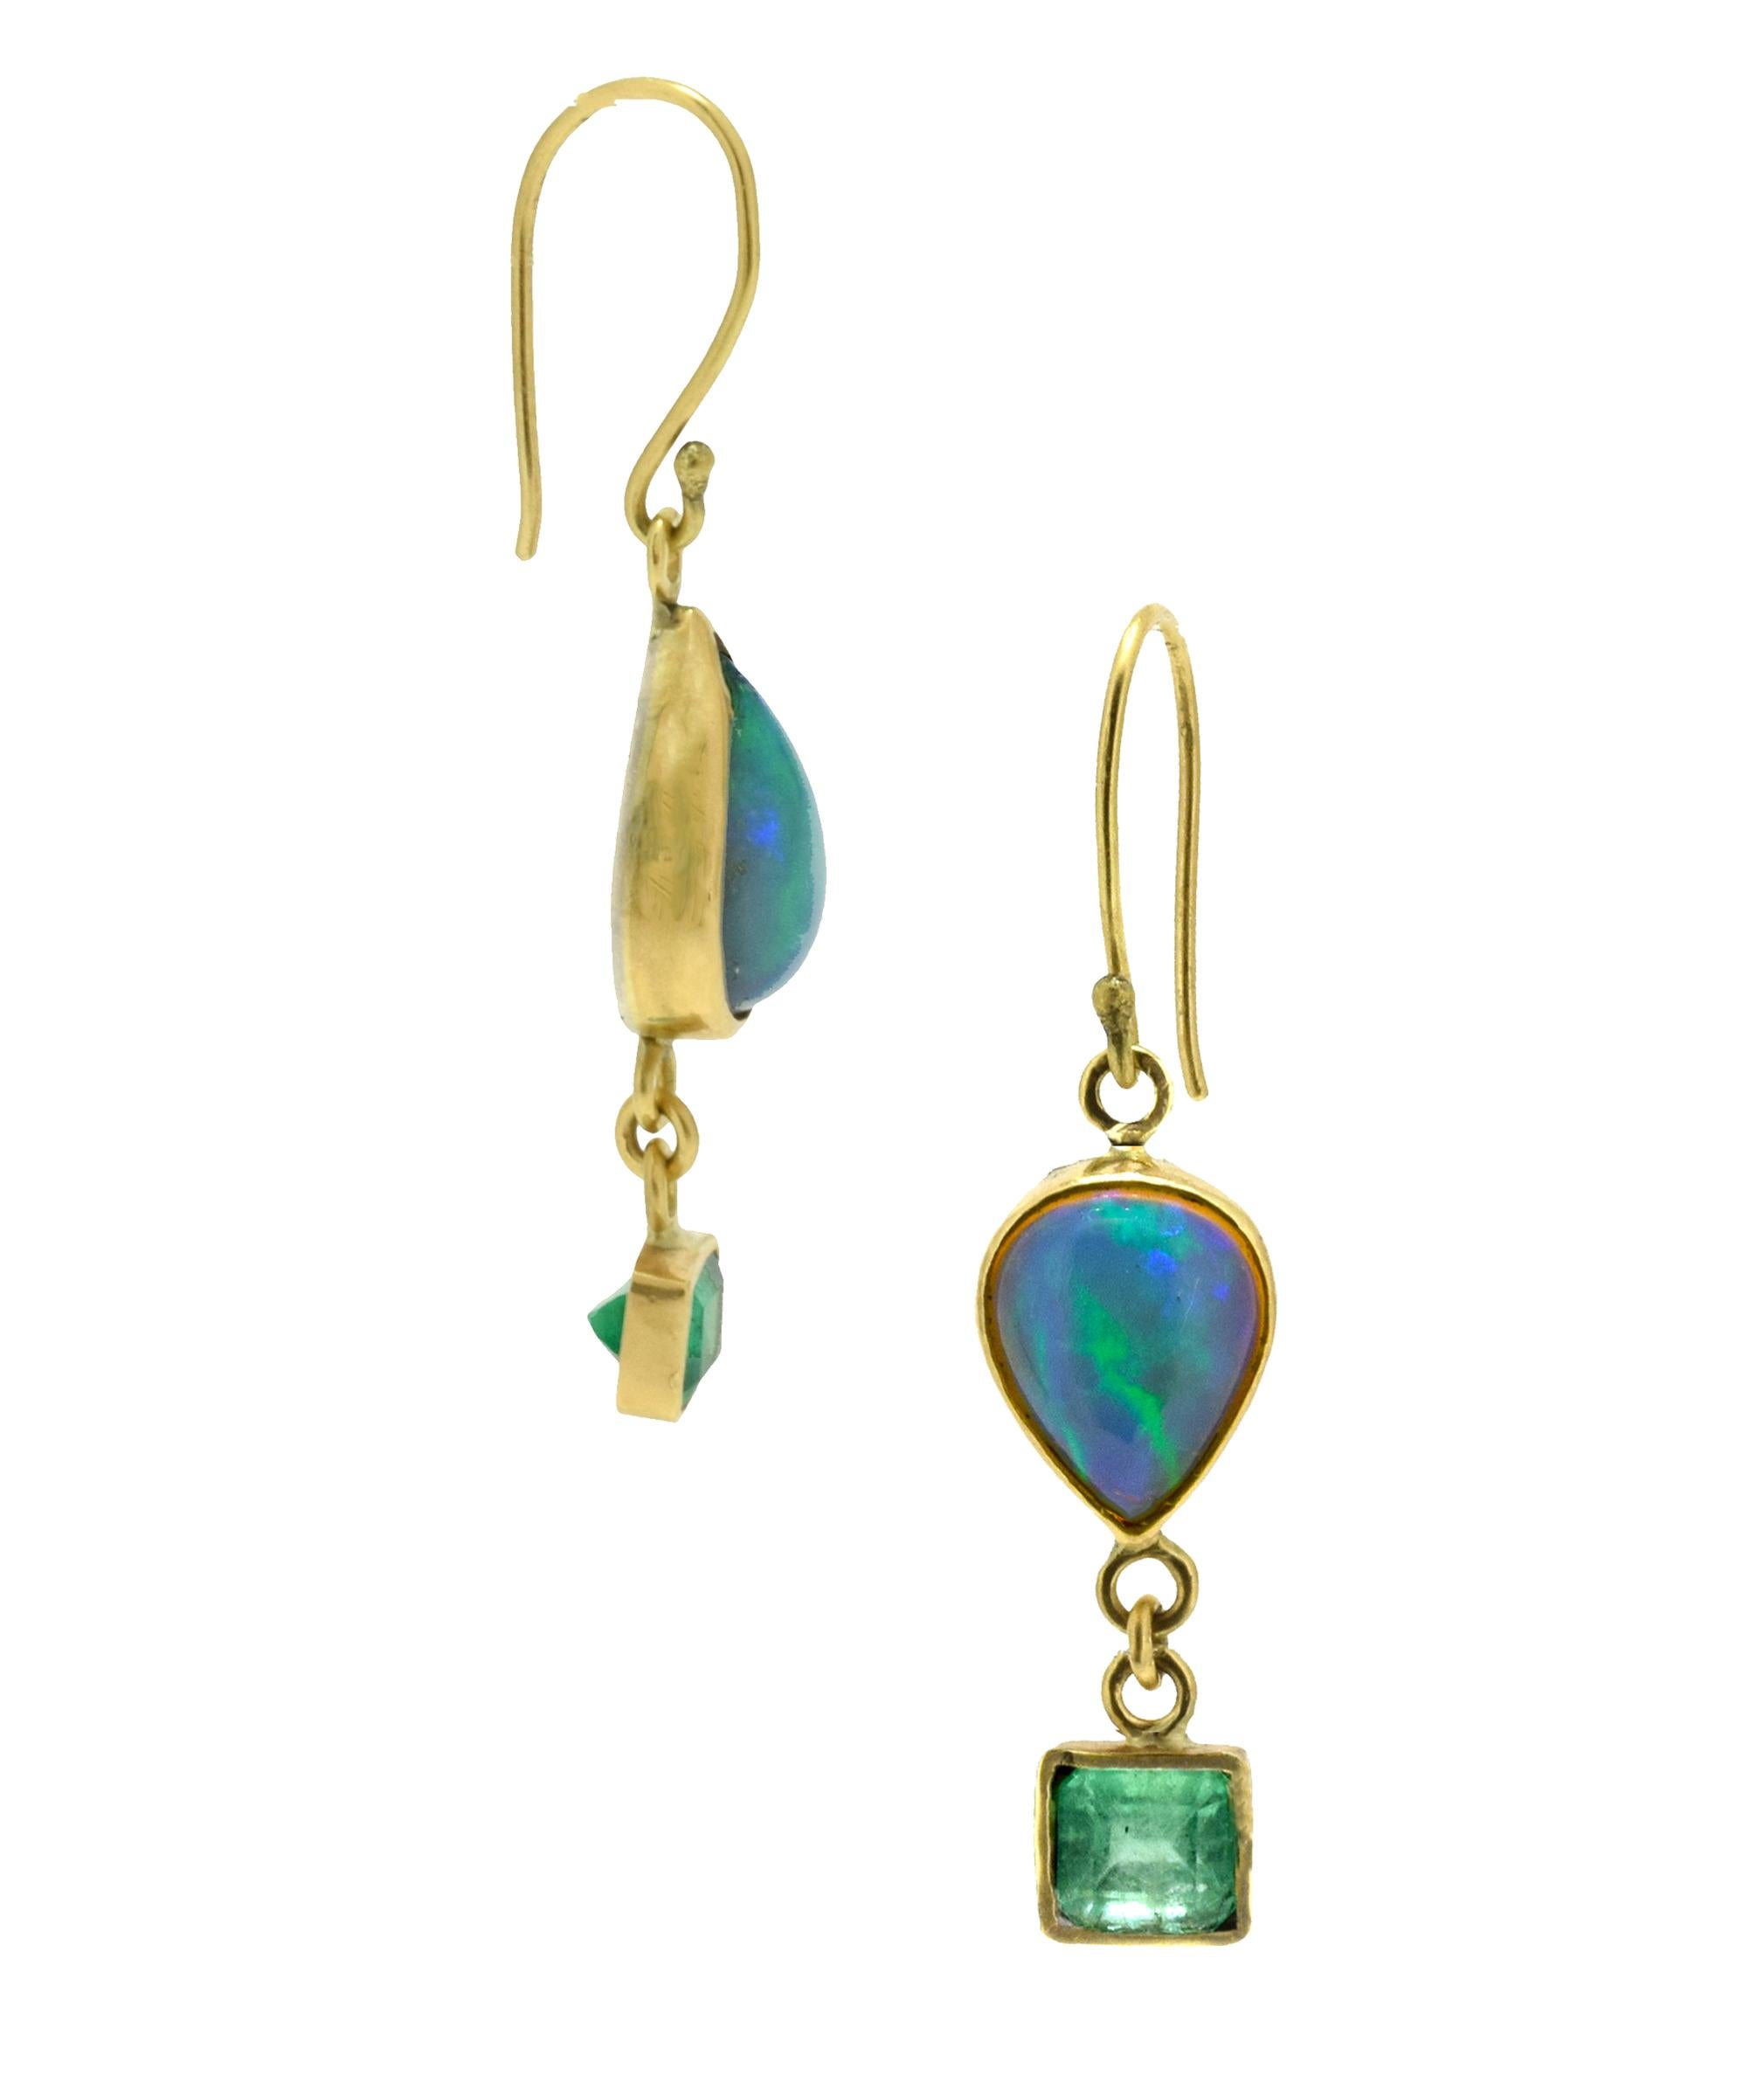 Ethiopian teardrop opals (4.67tcw) are paired with rectangular emeralds (3tcw) in these asymmetrical drop earrings. These opals have a lot of green/blue fire in them that glows when the light hits them. Bezel set in 18k recycled gold with a sterling